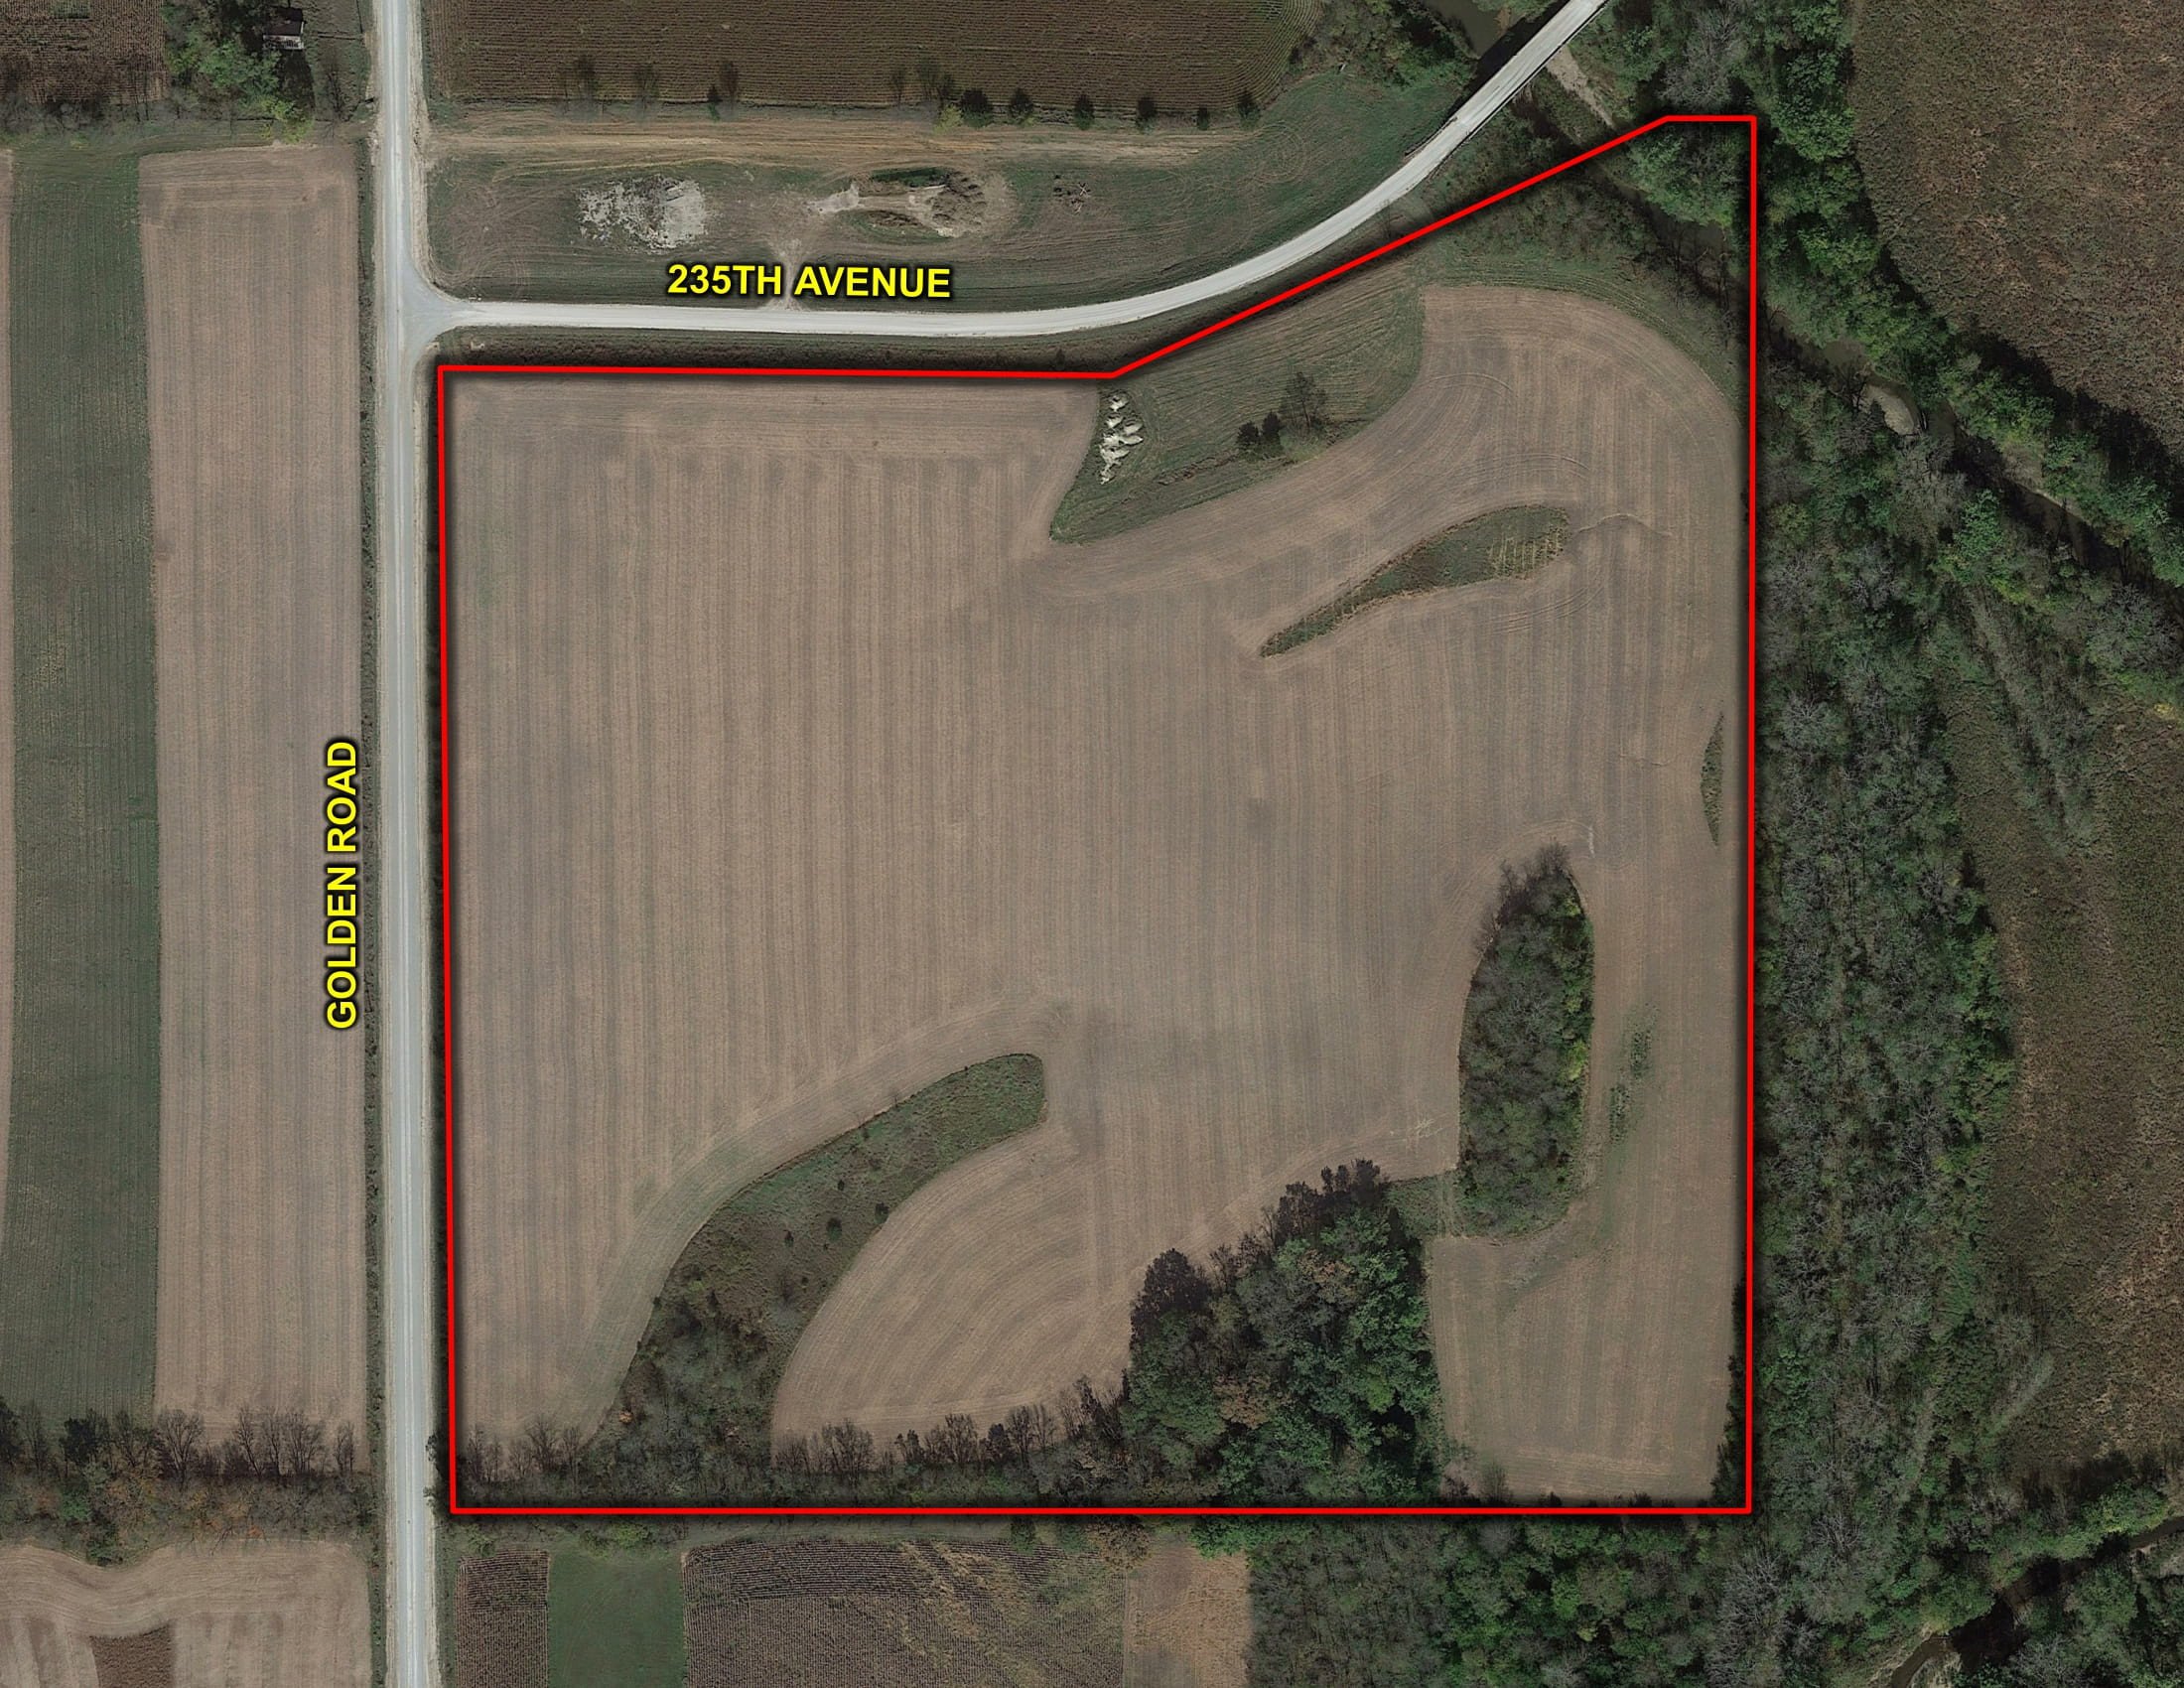 3-golden-road-235th-avenue-west-point-52656-Lee County, Iowa Land Auction Farms-14-7.jpg